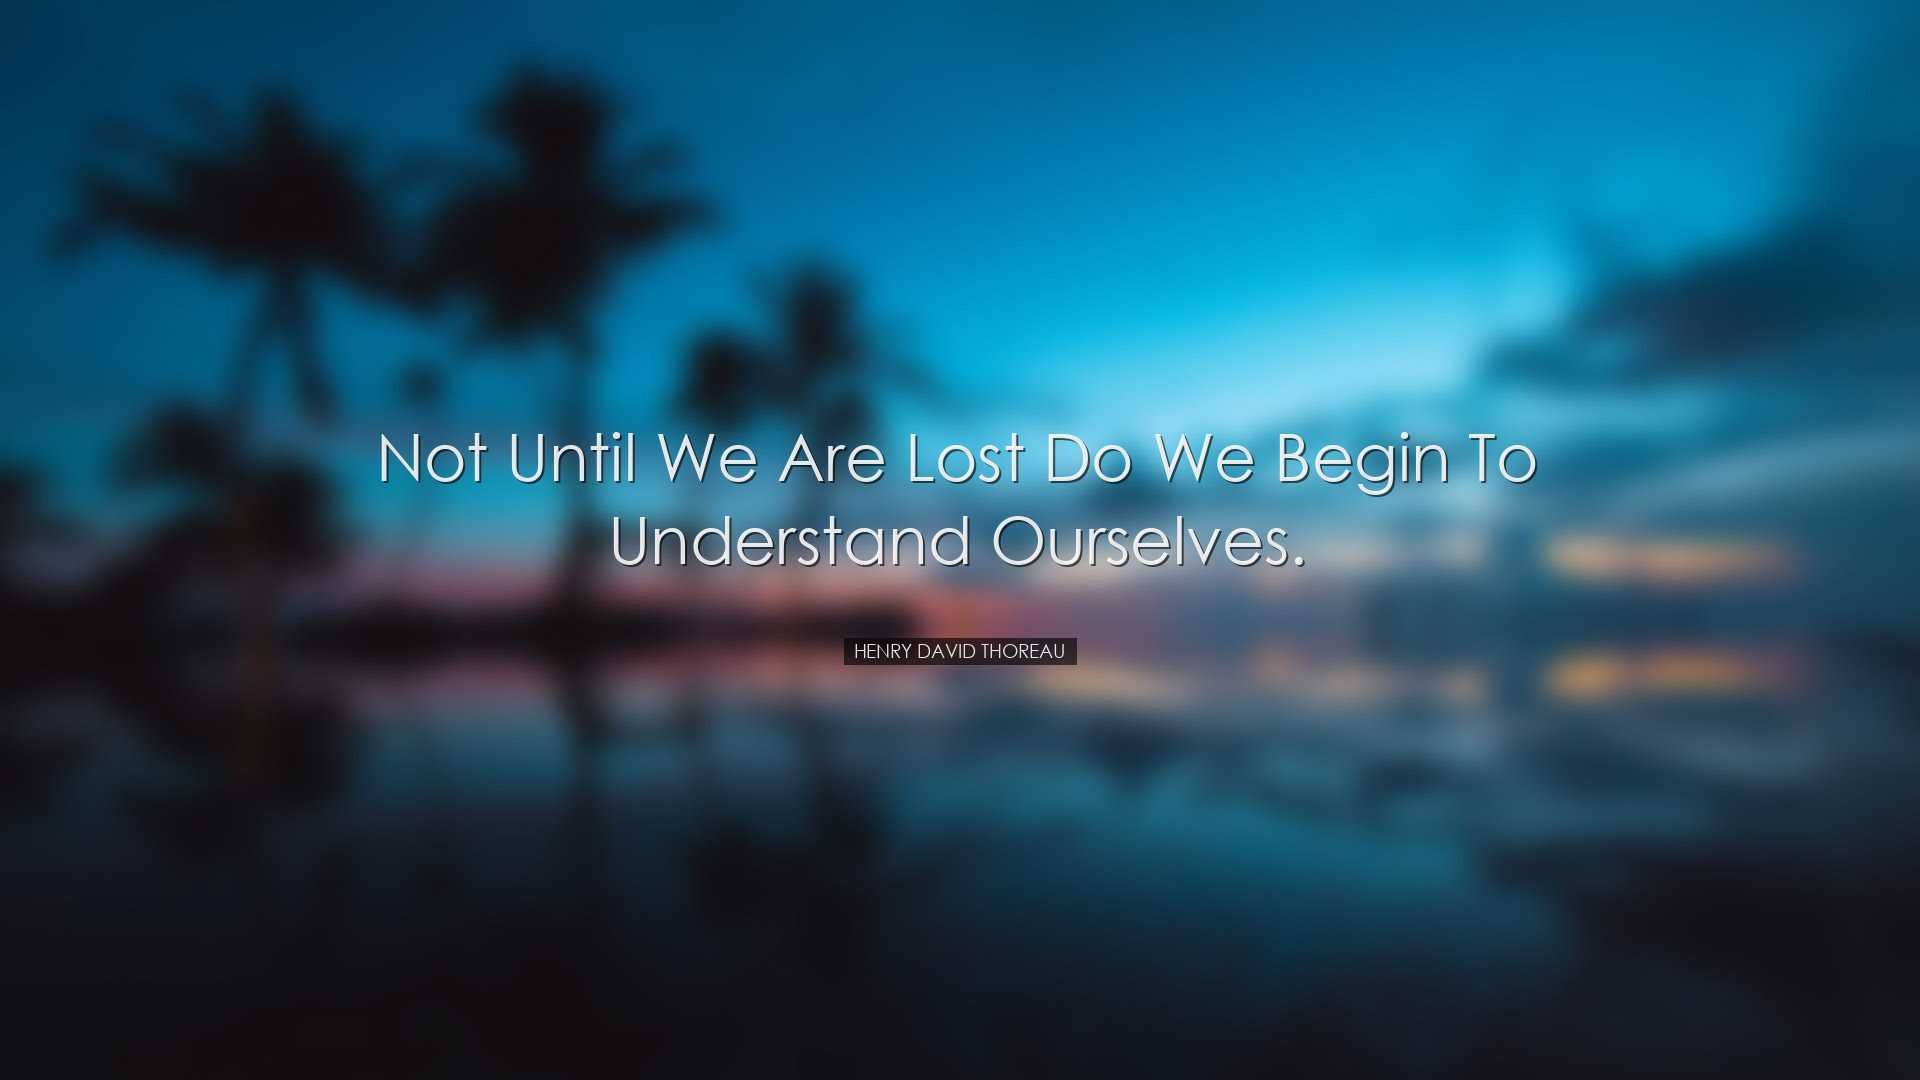 Not until we are lost do we begin to understand ourselves. - Henry